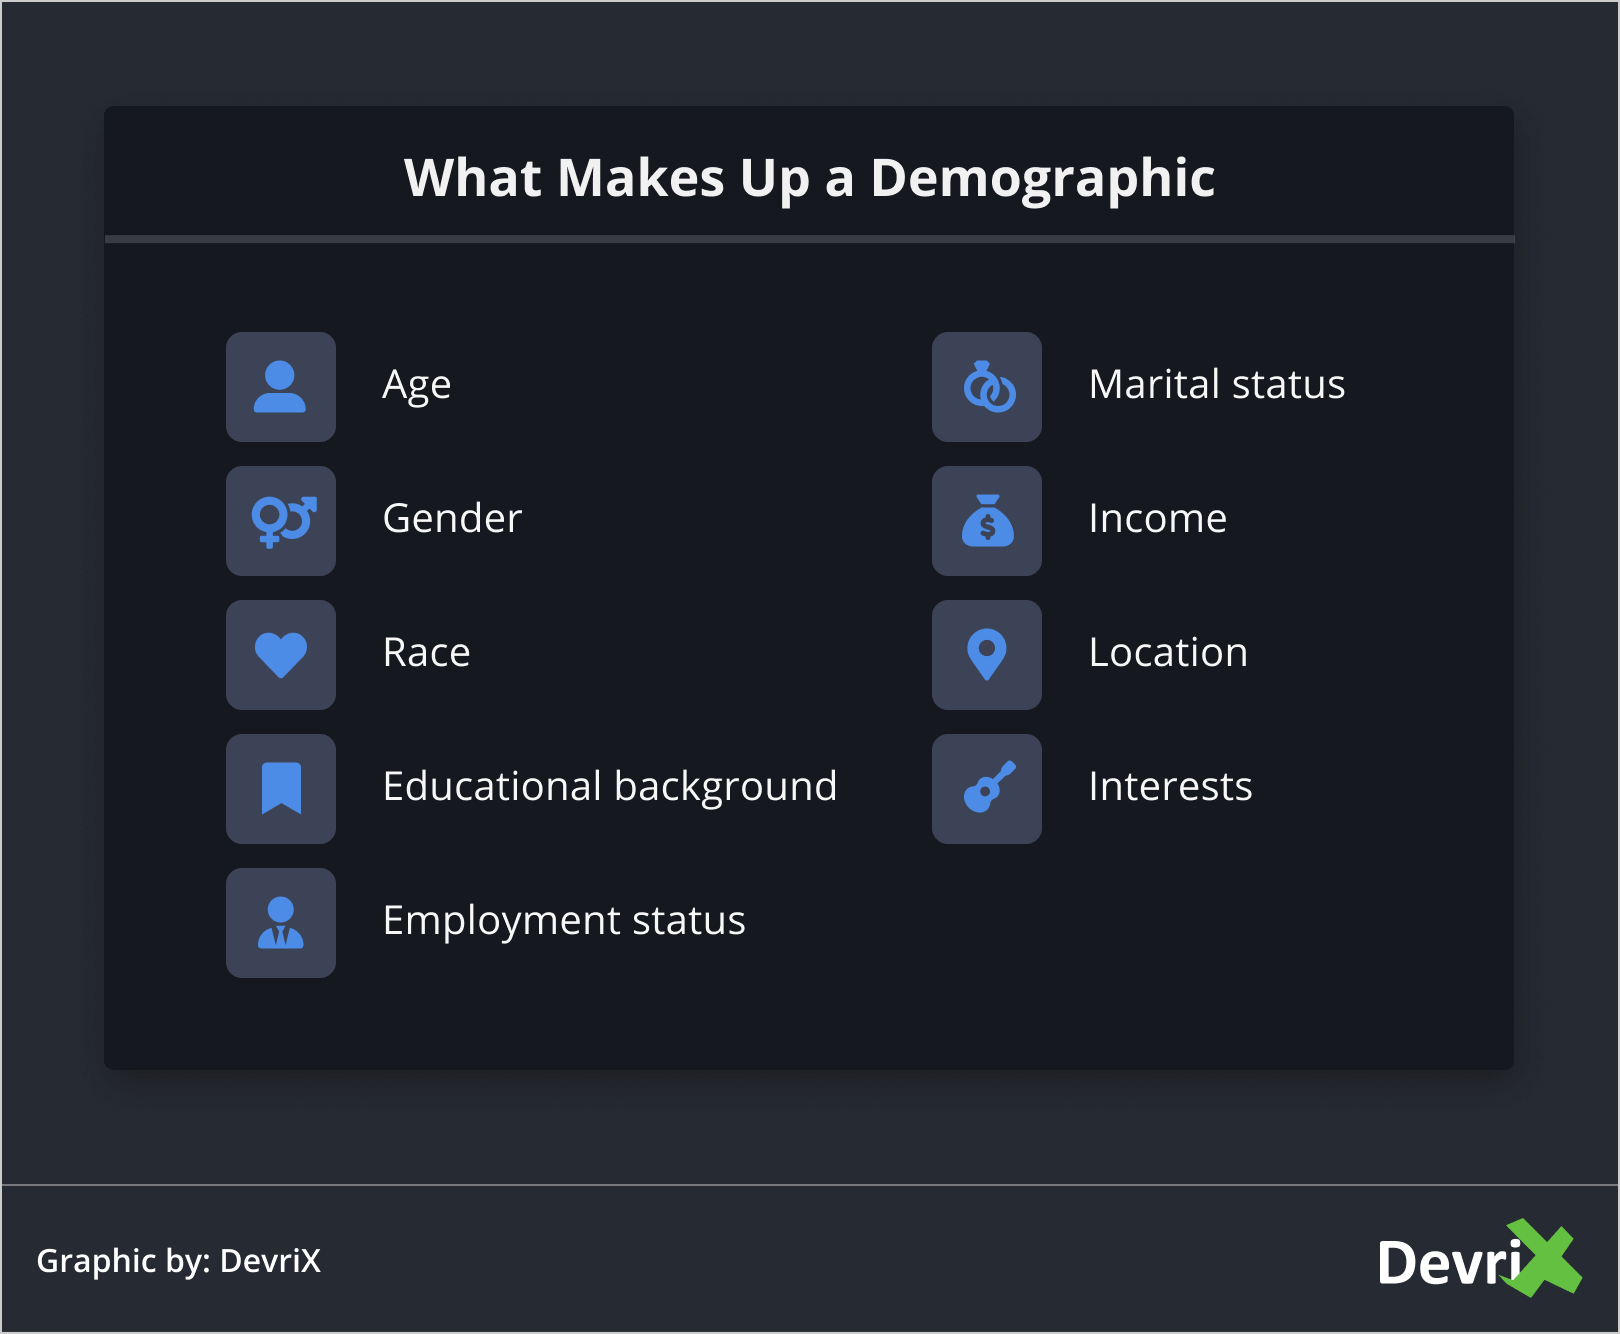 What Makes Up a Demographic